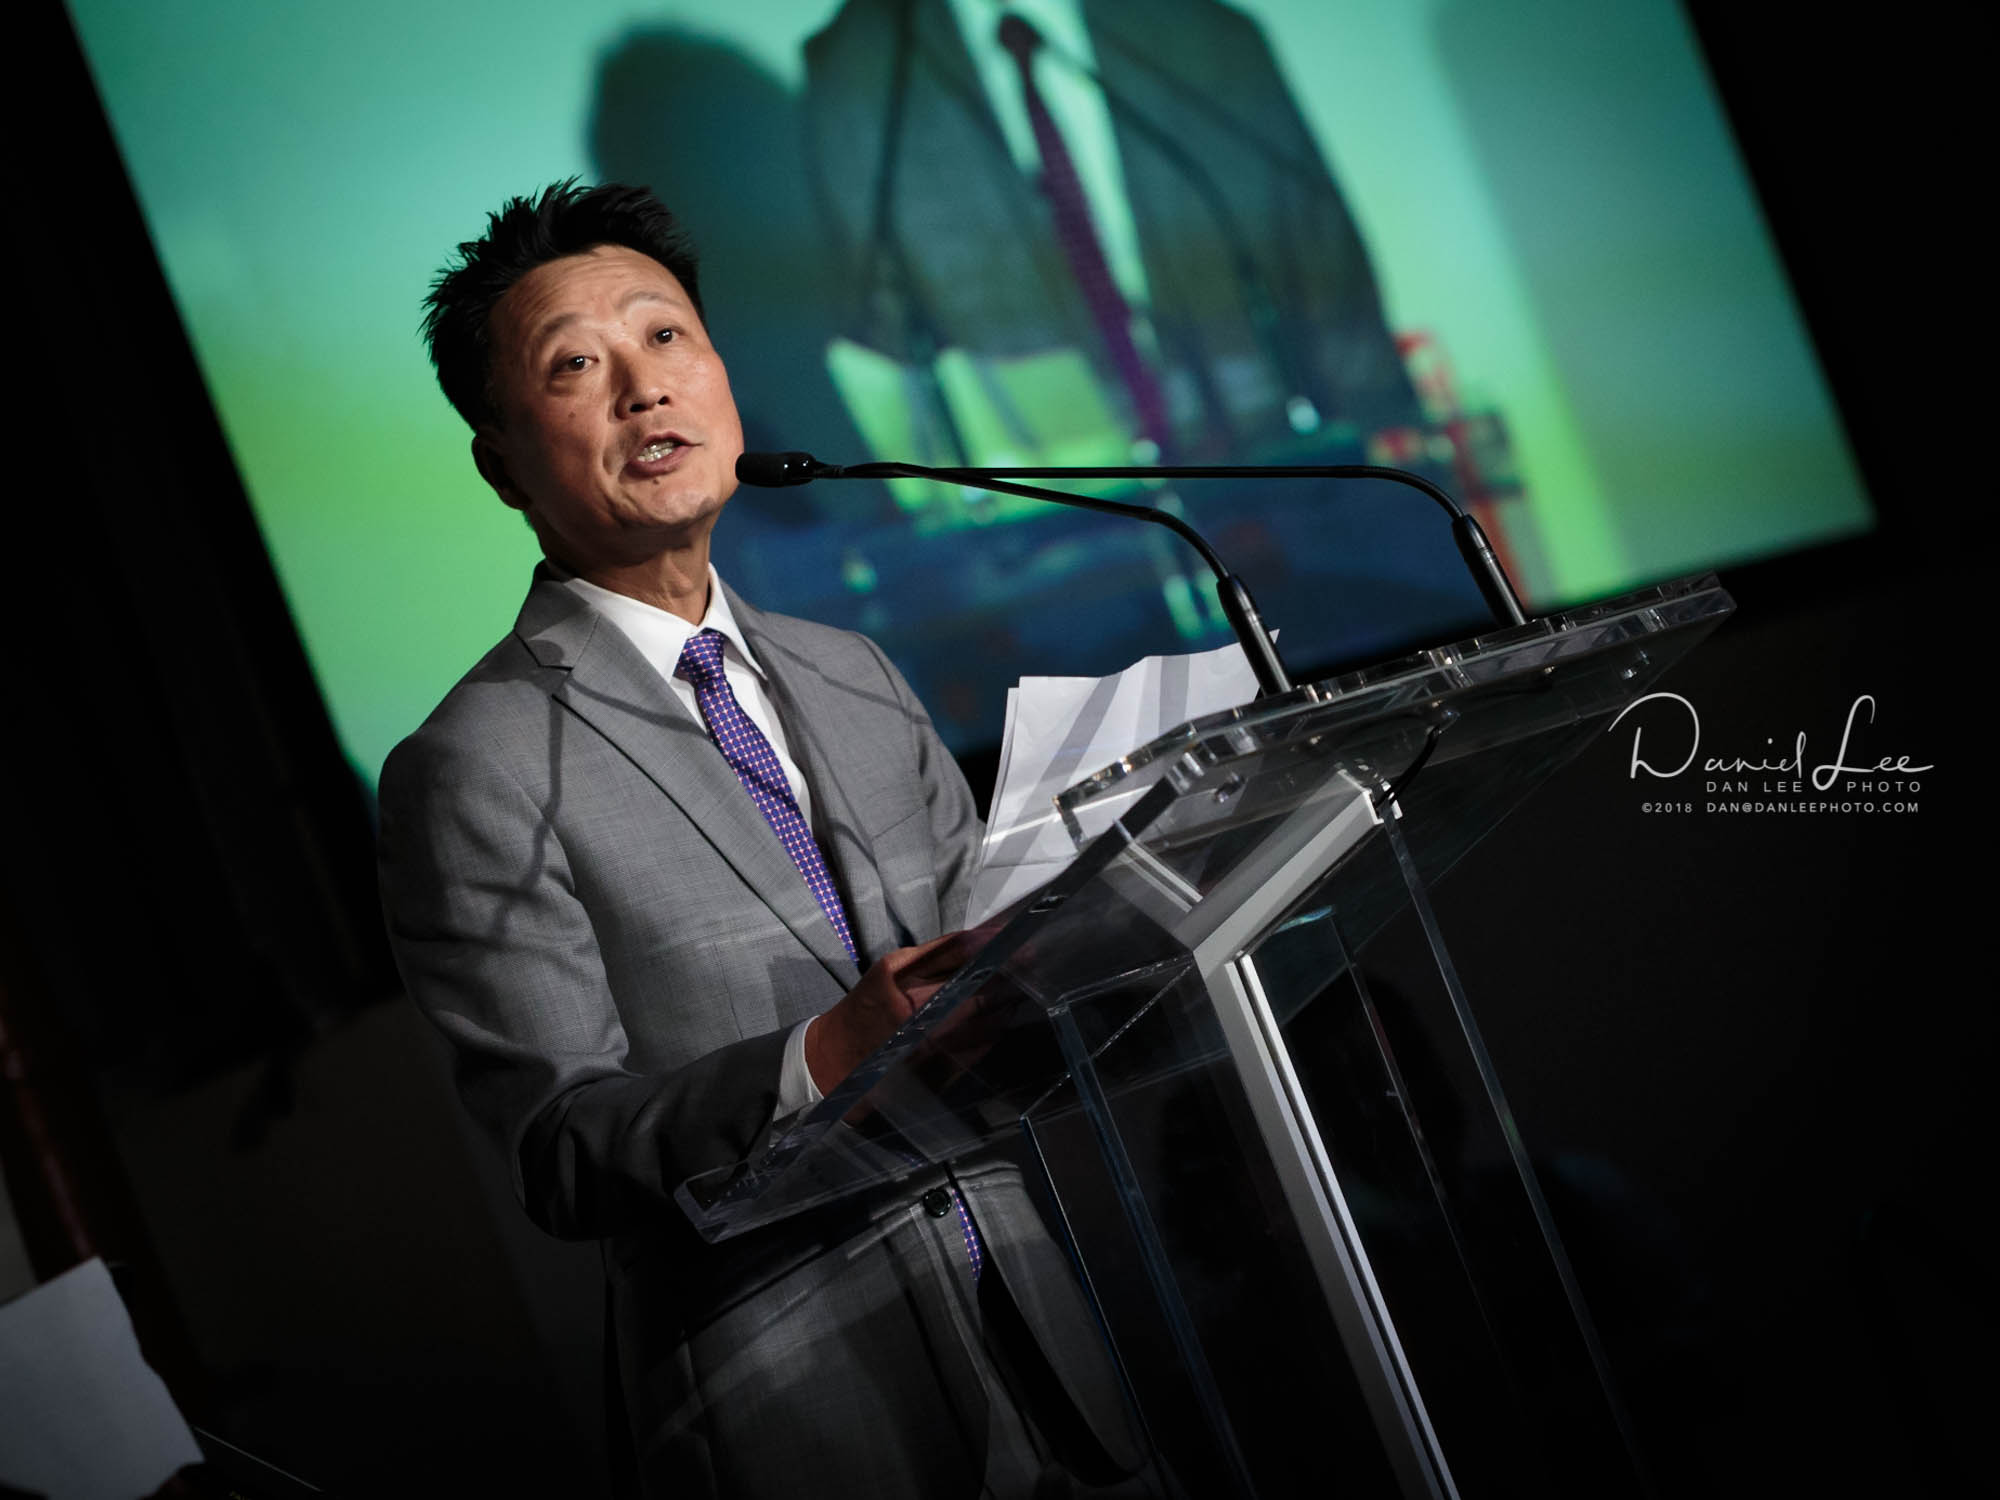  A speaker at KCSNY's annual fundraising gala. Photo by Daniel Lee. 